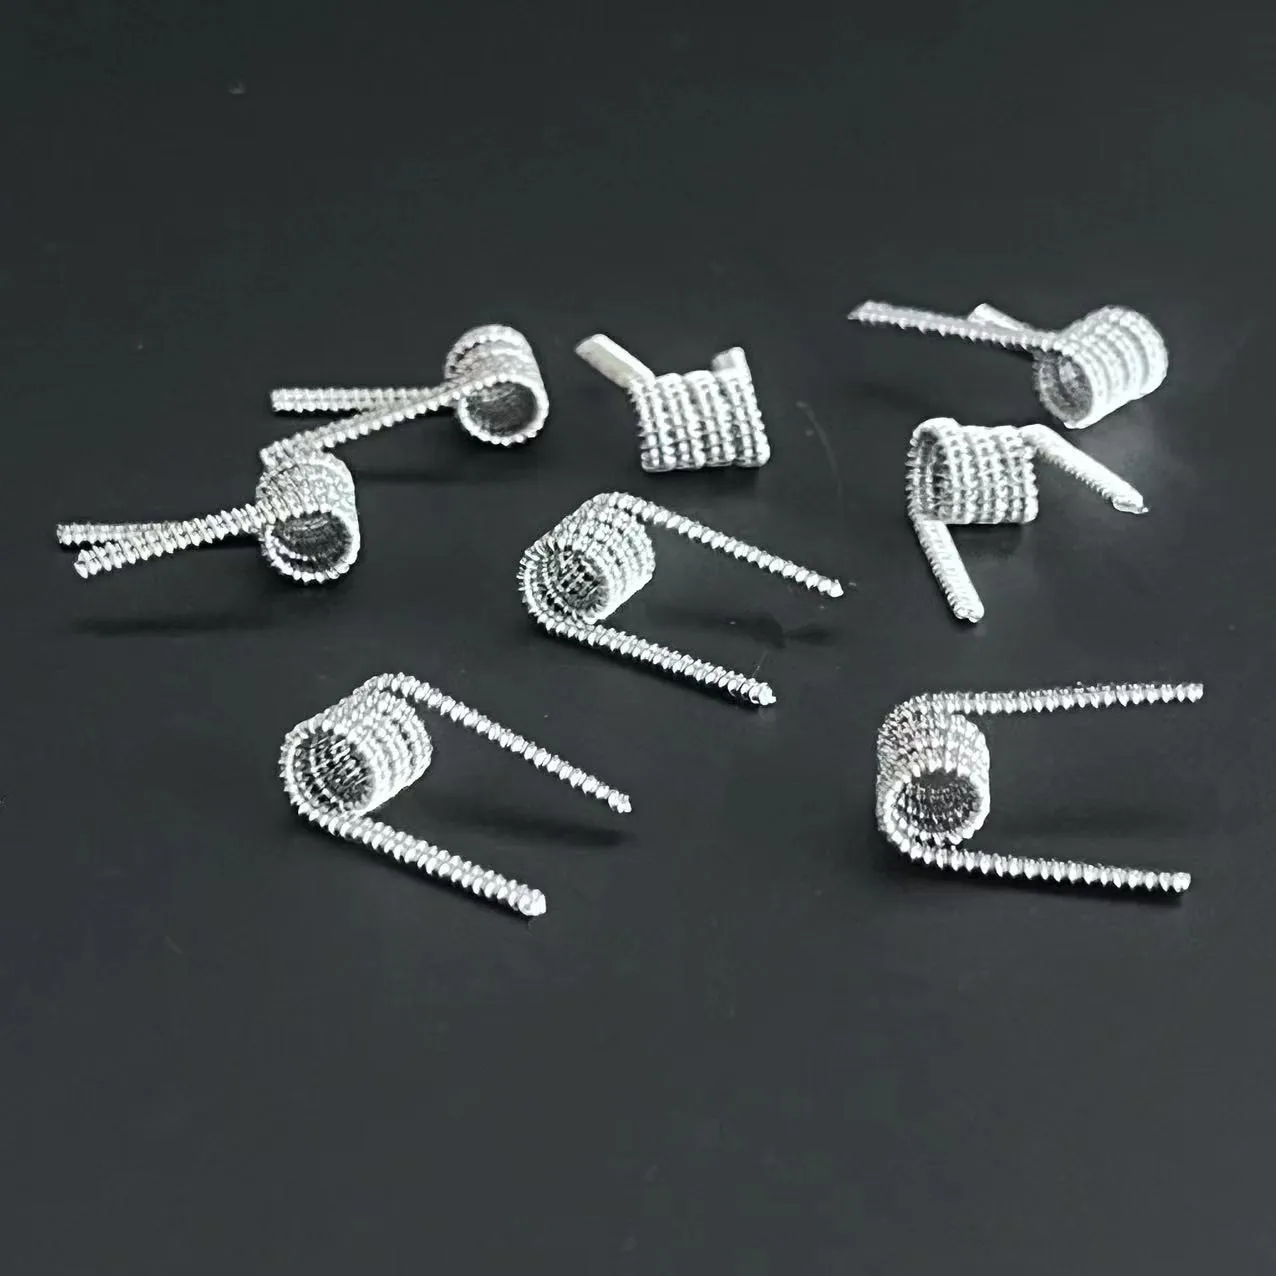 DL RDL 3mm Spiral ID PreBuilt Fused Clapton Coils Alien Twisted Resistance Coil KA1/A1/SS316L/NI80 Heating Wire Disassembly Tool